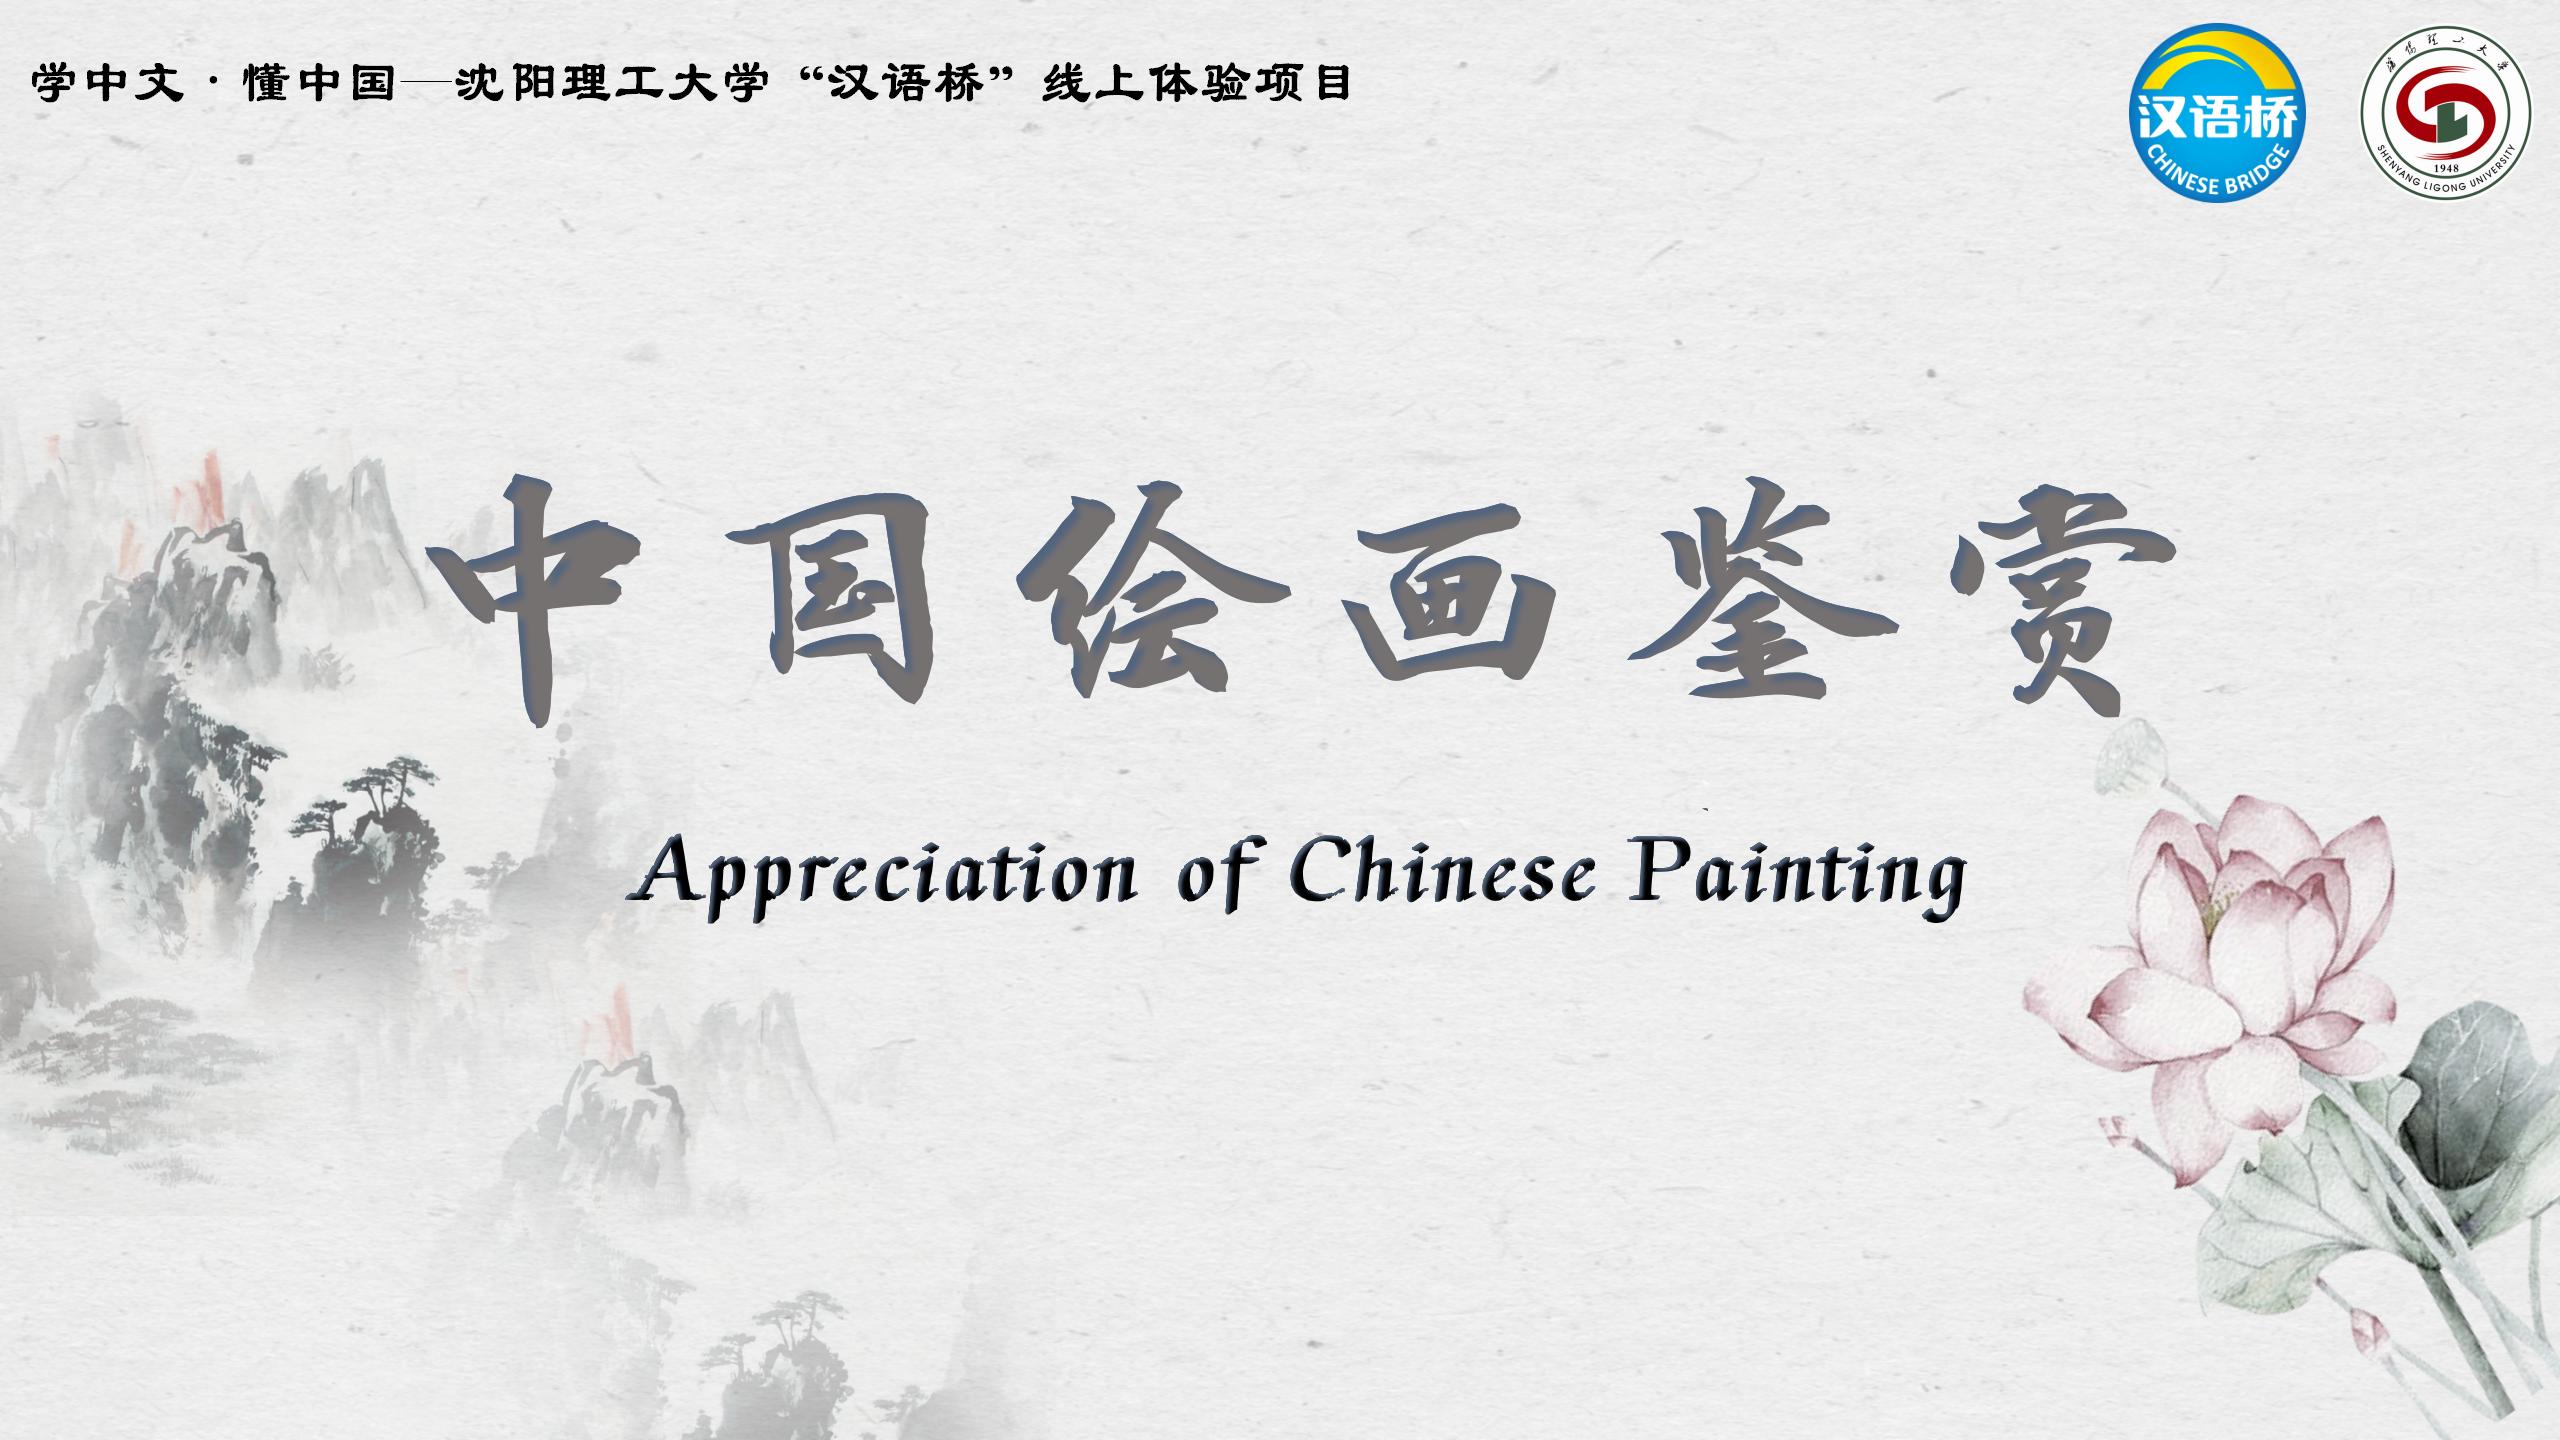 Appreciation of Chinese Painting